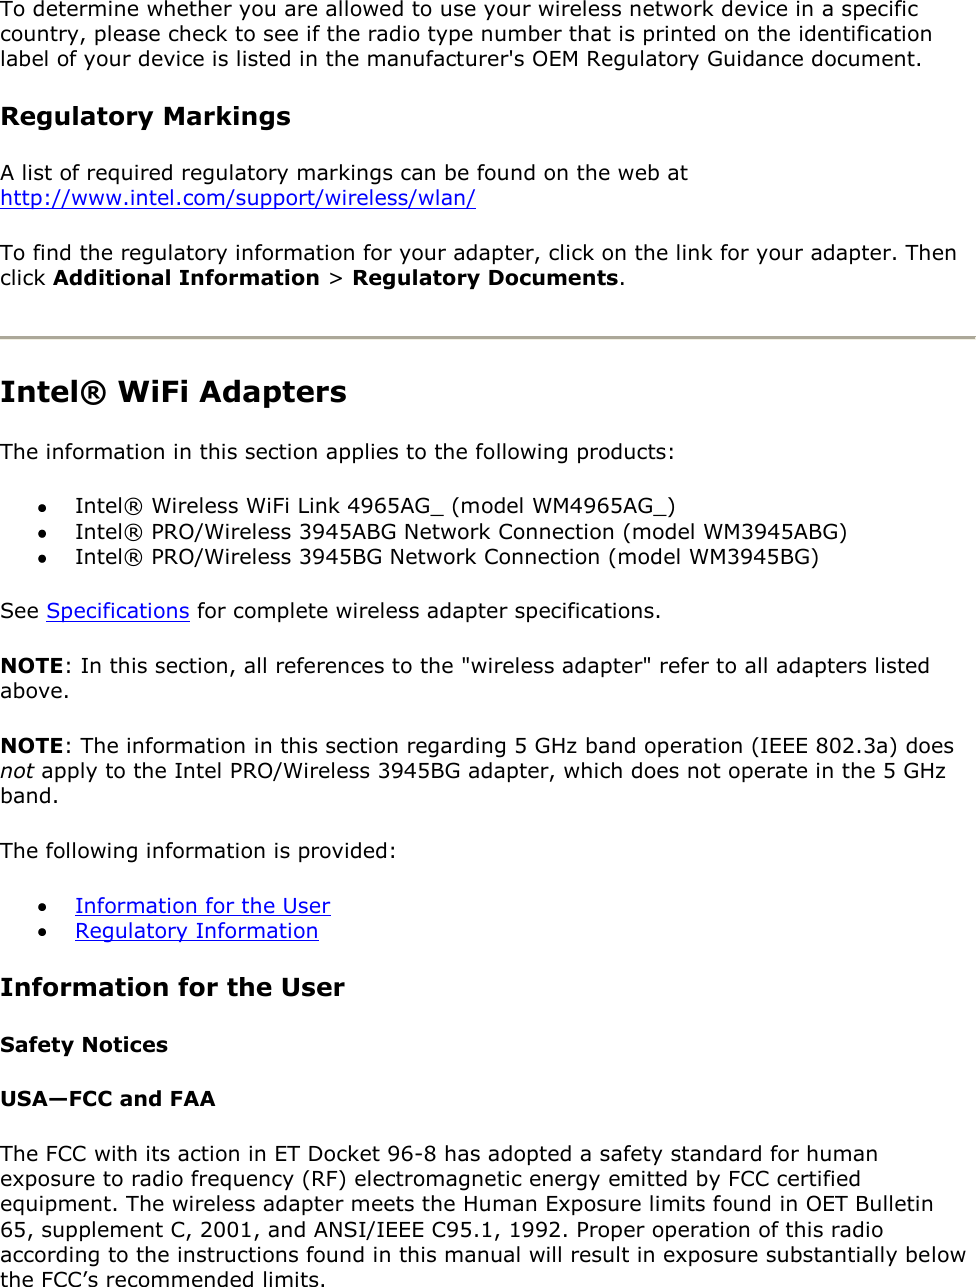 To determine whether you are allowed to use your wireless network device in a specific country, please check to see if the radio type number that is printed on the identification label of your device is listed in the manufacturer&apos;s OEM Regulatory Guidance document. Regulatory Markings A list of required regulatory markings can be found on the web at http://www.intel.com/support/wireless/wlan/ To find the regulatory information for your adapter, click on the link for your adapter. Then click Additional Information &gt; Regulatory Documents.   Intel® WiFi Adapters The information in this section applies to the following products:  Intel® Wireless WiFi Link 4965AG_ (model WM4965AG_)  Intel® PRO/Wireless 3945ABG Network Connection (model WM3945ABG)  Intel® PRO/Wireless 3945BG Network Connection (model WM3945BG) See Specifications for complete wireless adapter specifications. NOTE: In this section, all references to the &quot;wireless adapter&quot; refer to all adapters listed above. NOTE: The information in this section regarding 5 GHz band operation (IEEE 802.3a) does not apply to the Intel PRO/Wireless 3945BG adapter, which does not operate in the 5 GHz band. The following information is provided:   Information for the User  Regulatory Information  Information for the User Safety Notices USA—FCC and FAA The FCC with its action in ET Docket 96-8 has adopted a safety standard for human exposure to radio frequency (RF) electromagnetic energy emitted by FCC certified equipment. The wireless adapter meets the Human Exposure limits found in OET Bulletin 65, supplement C, 2001, and ANSI/IEEE C95.1, 1992. Proper operation of this radio according to the instructions found in this manual will result in exposure substantially below the FCC’s recommended limits. 